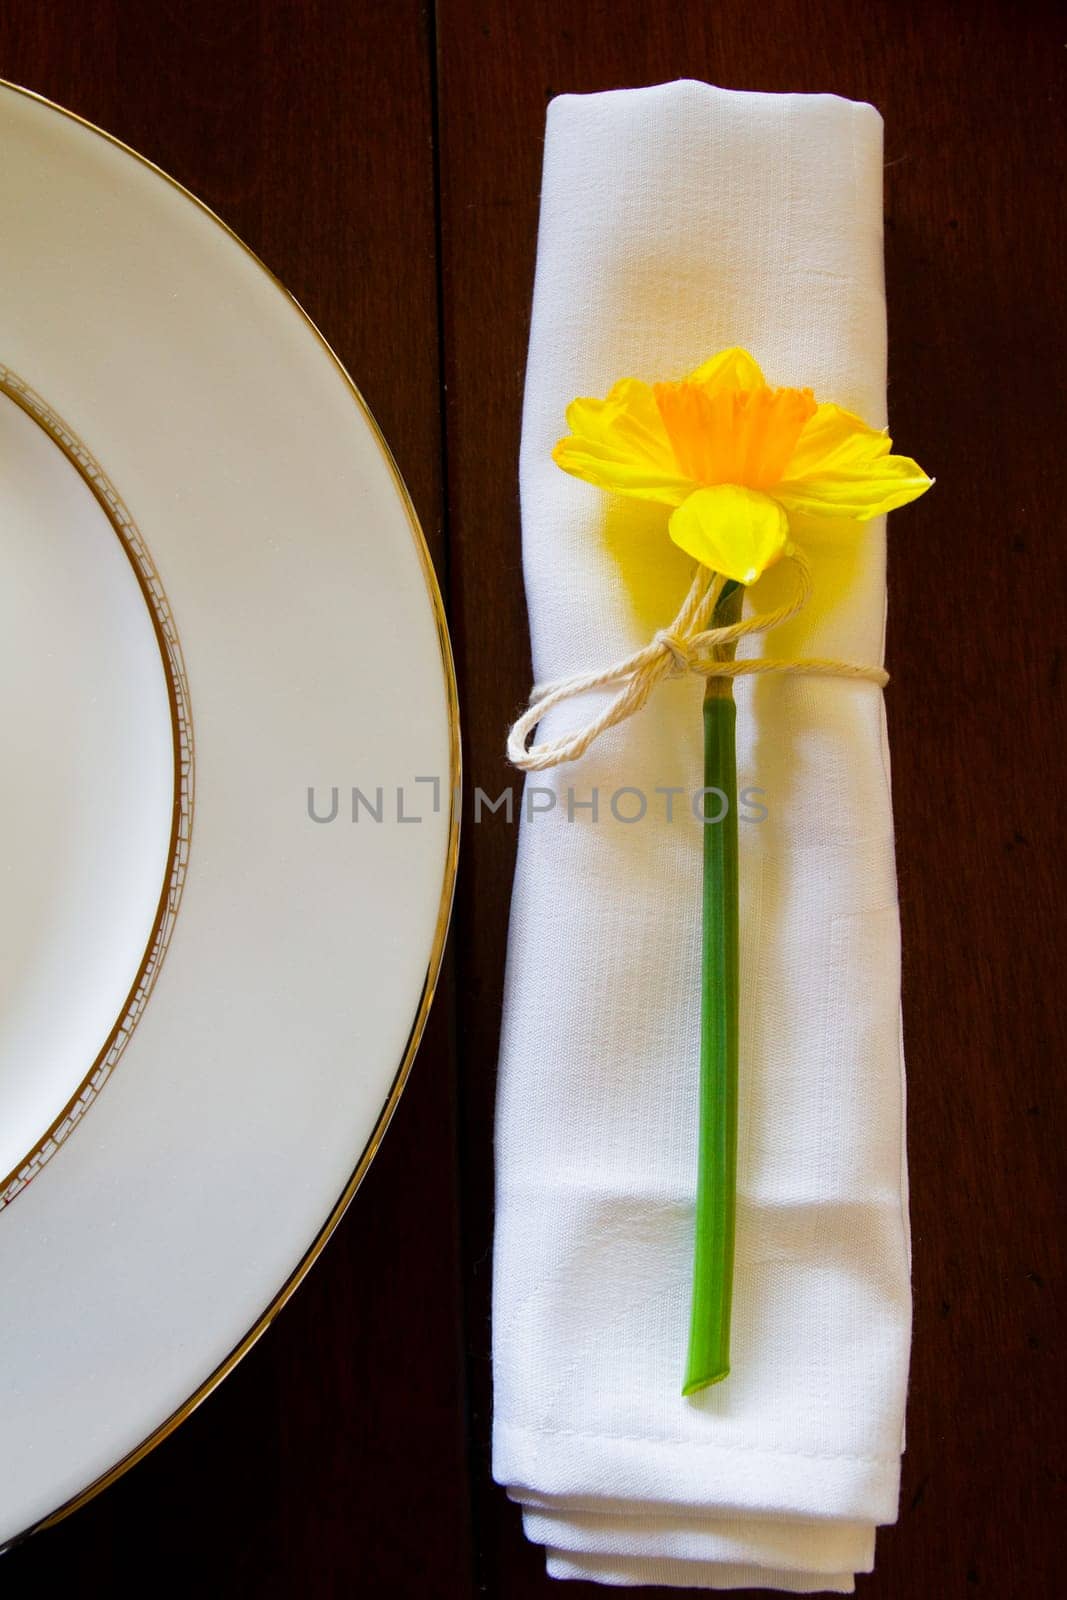 Elegant Springtime Table Setting with Daffodil Accent and Golden Rimmed Plate by njproductions